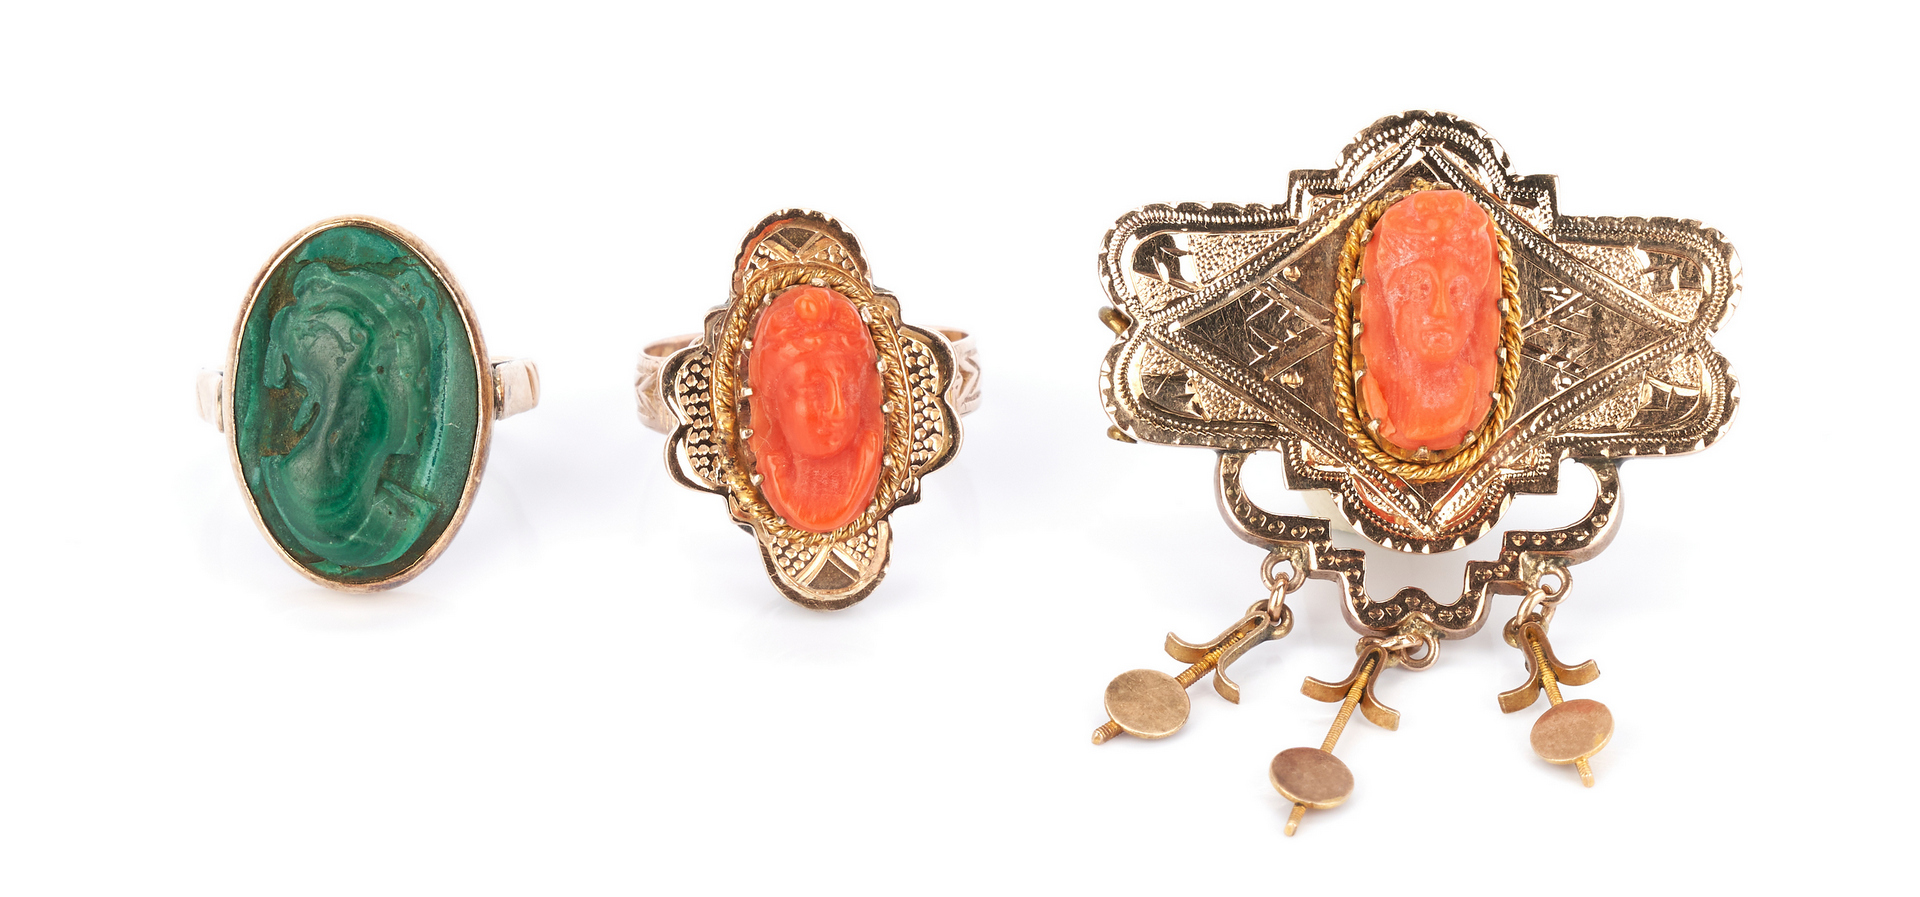 Lot 1041: 2 Ladies 10K Rings and 1 Brooch with Cameos